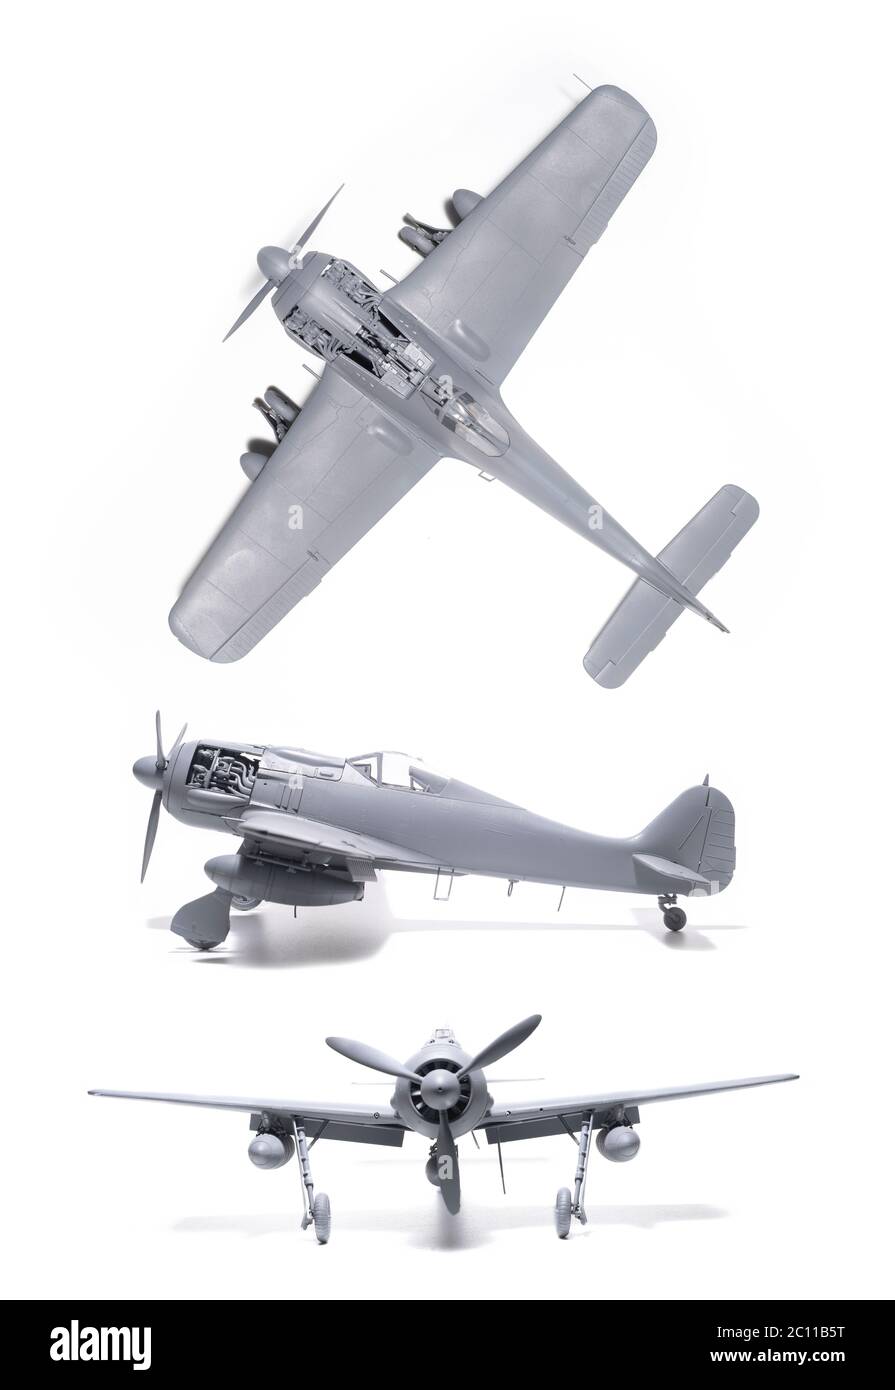 Focke Wulf FW190 F-8, plan, side elevation and frontal view on white background Stock Photo